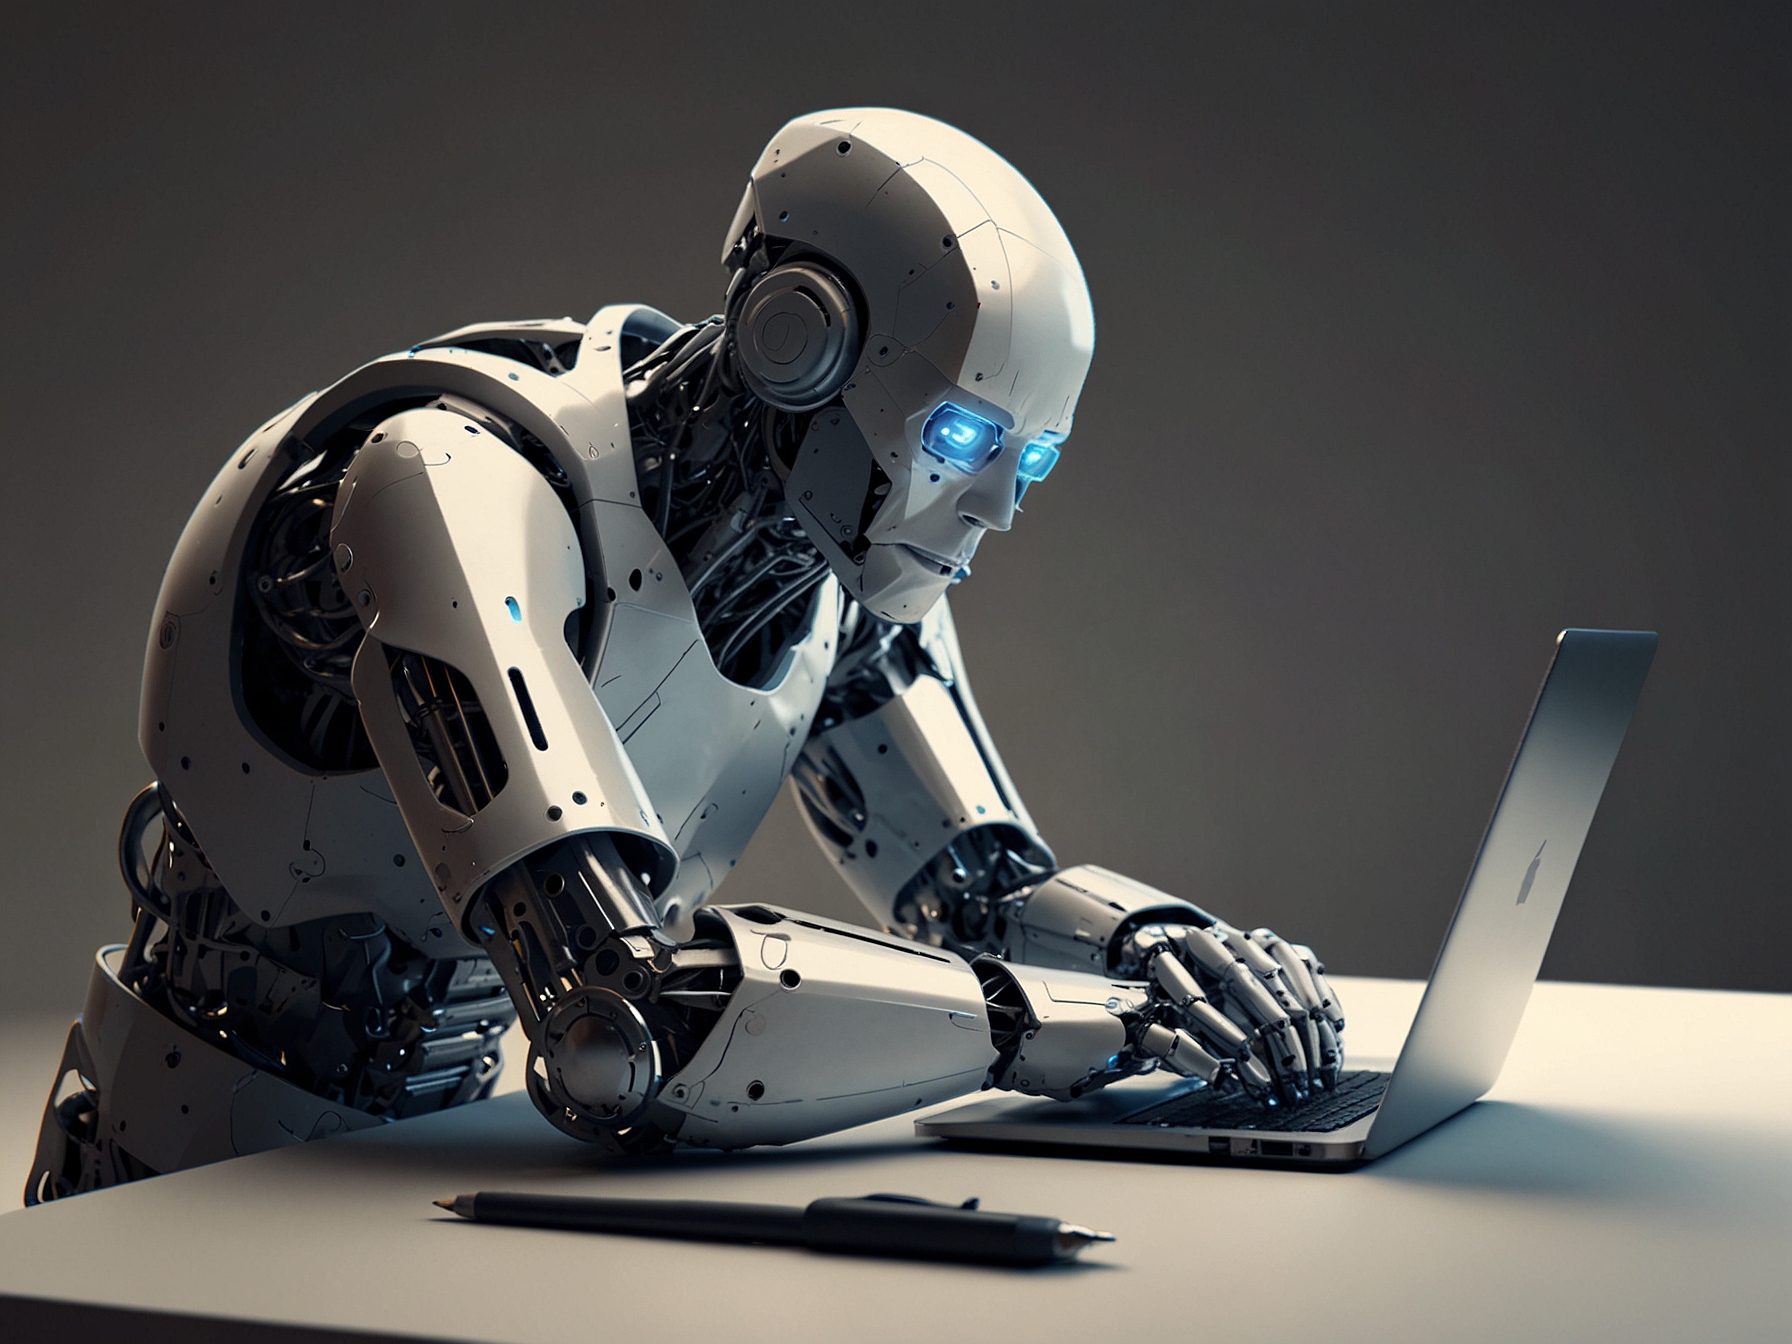 A person working on a laptop with a thoughtful expression, juxtaposed with a robot generating content on a similar setup, highlighting the differences in creativity and depth.